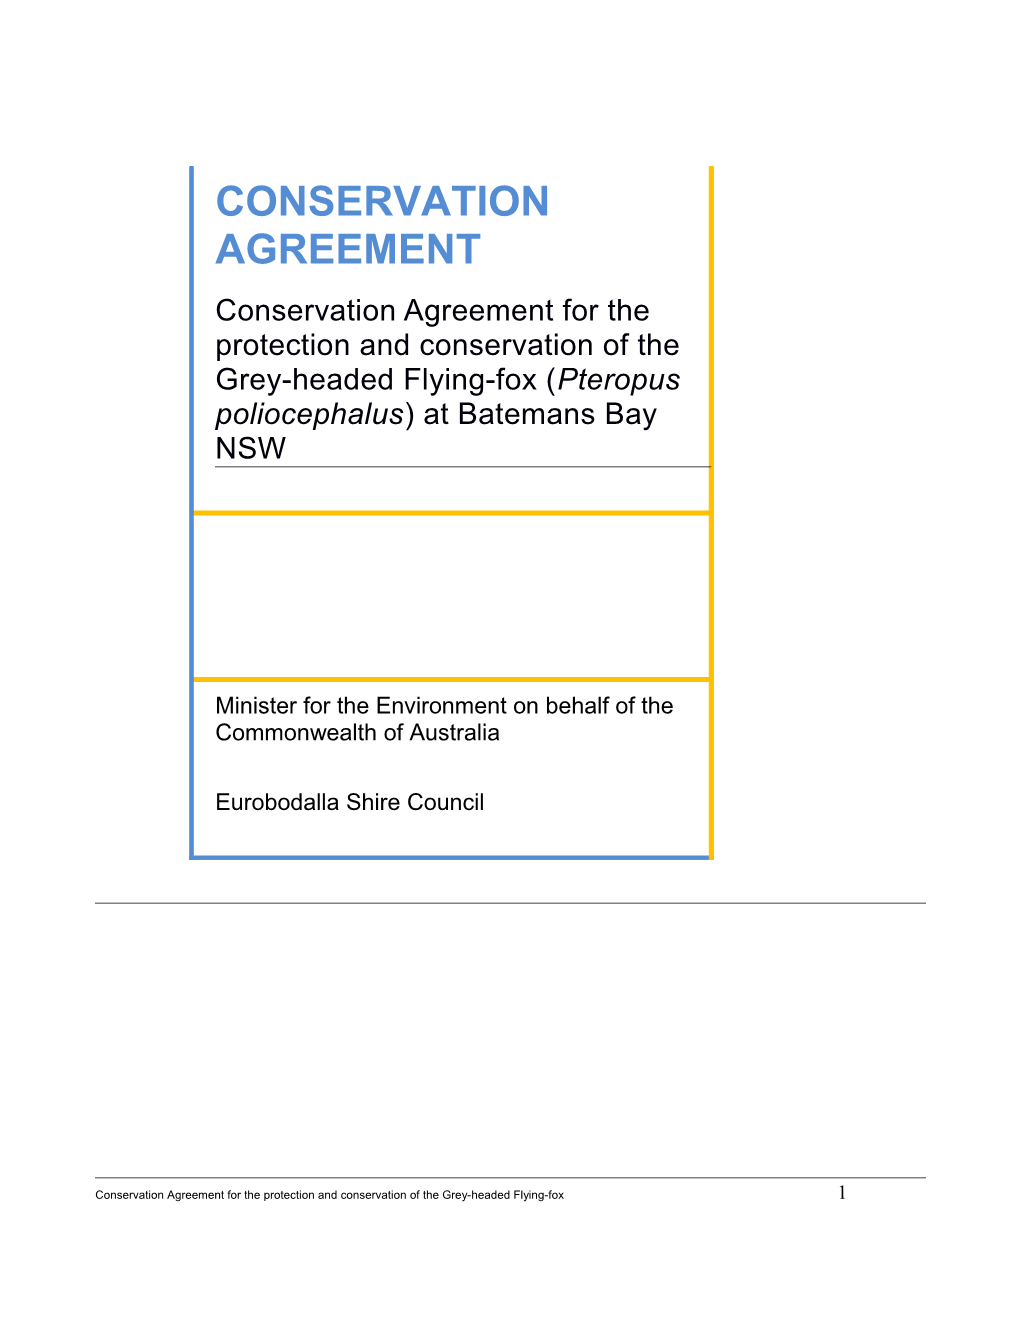 Conservation Agreement for the Protection and Conservation of the Grey-Headed Flying-Fox1